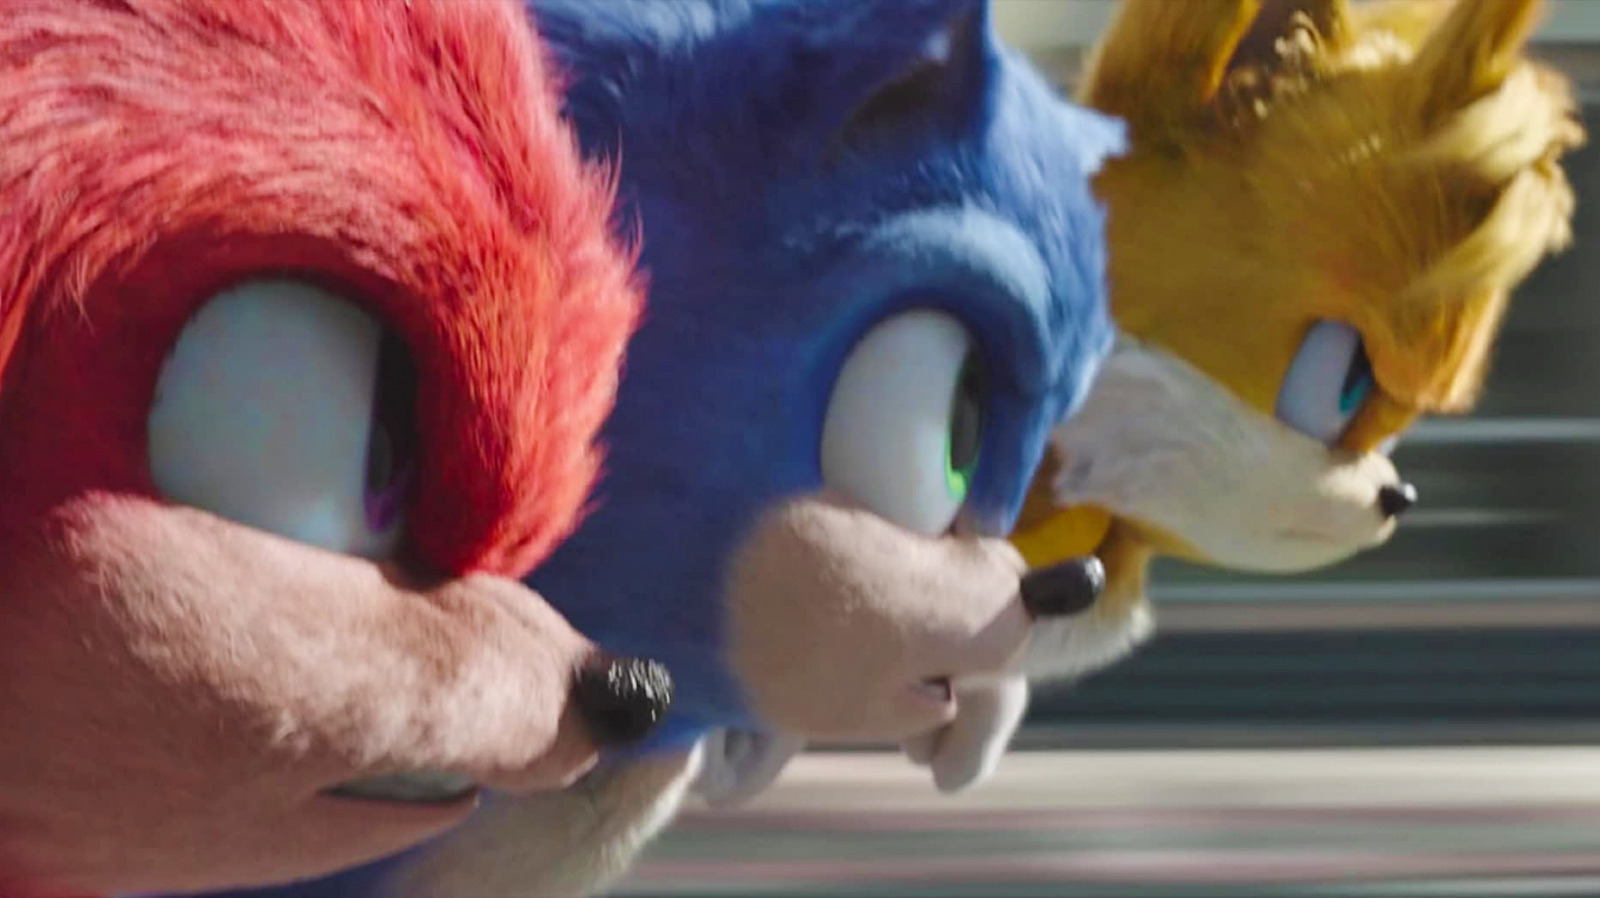 Sonic The Hedgehog 3 Release Date, Cast, And More